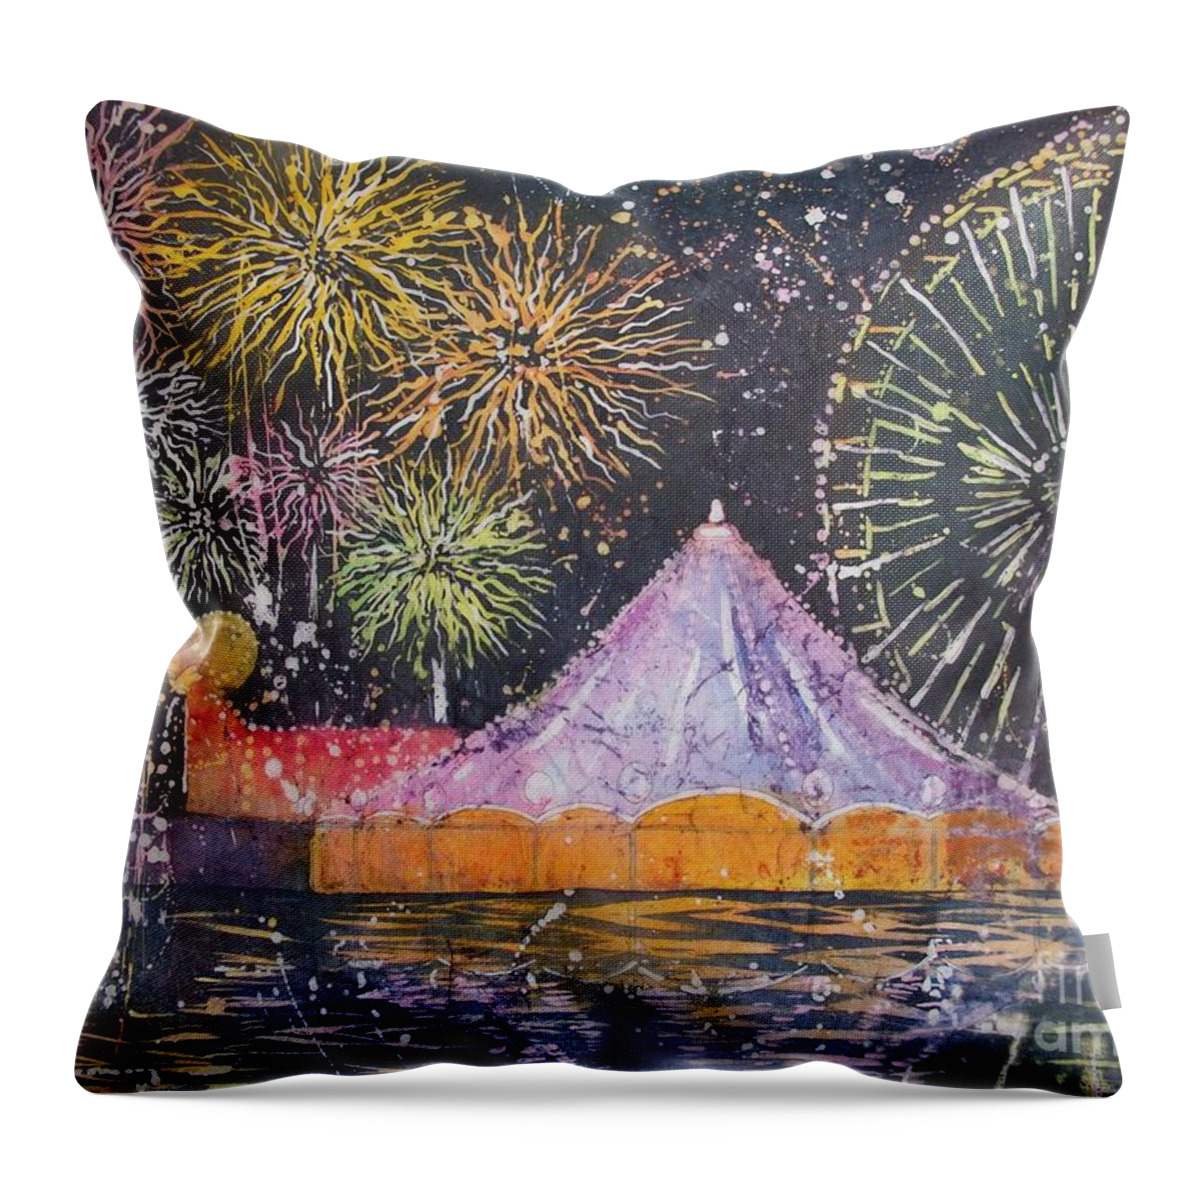 Tents Throw Pillow featuring the painting Carnival Magic by Carol Losinski Naylor